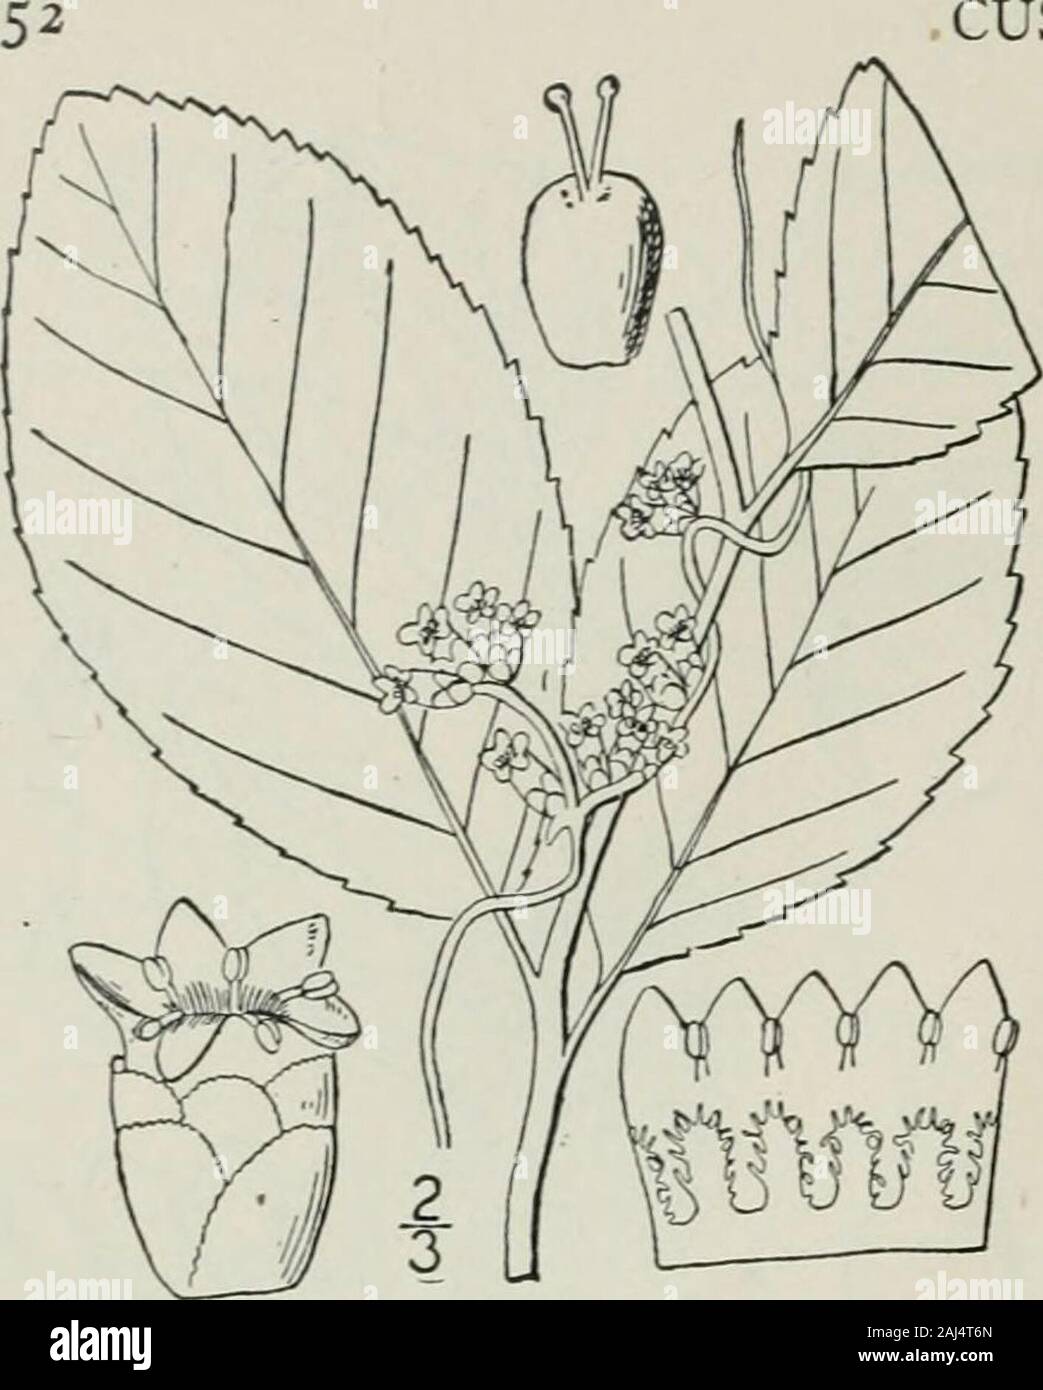 An illustrated flora of the northern United States, Canada and the British possessions : from Newfoundland to the parallel of the southern boundary of Virginia and from the Atlantic Ocean westward to the 102nd meridian . CUSCUTACEAE. Vol. III. II. Cuscuta compacta Juss. CompactDodder. Love-vine. Fig. 3452. Cuscuta compacta Juss.; Choisy, Mem, Soc. Gen. 9: 281. t. 4. f. 2. 1841. Plant yellowish white, stems rather stout; flow-ers about 2 long, closely sessile in dense clusters.Calyx of 5 (rarely 4) distinct oval crenulate ob-tuse sepals, subtended by 3-5 similar rhombic-orbicular appressed serr Stock Photo